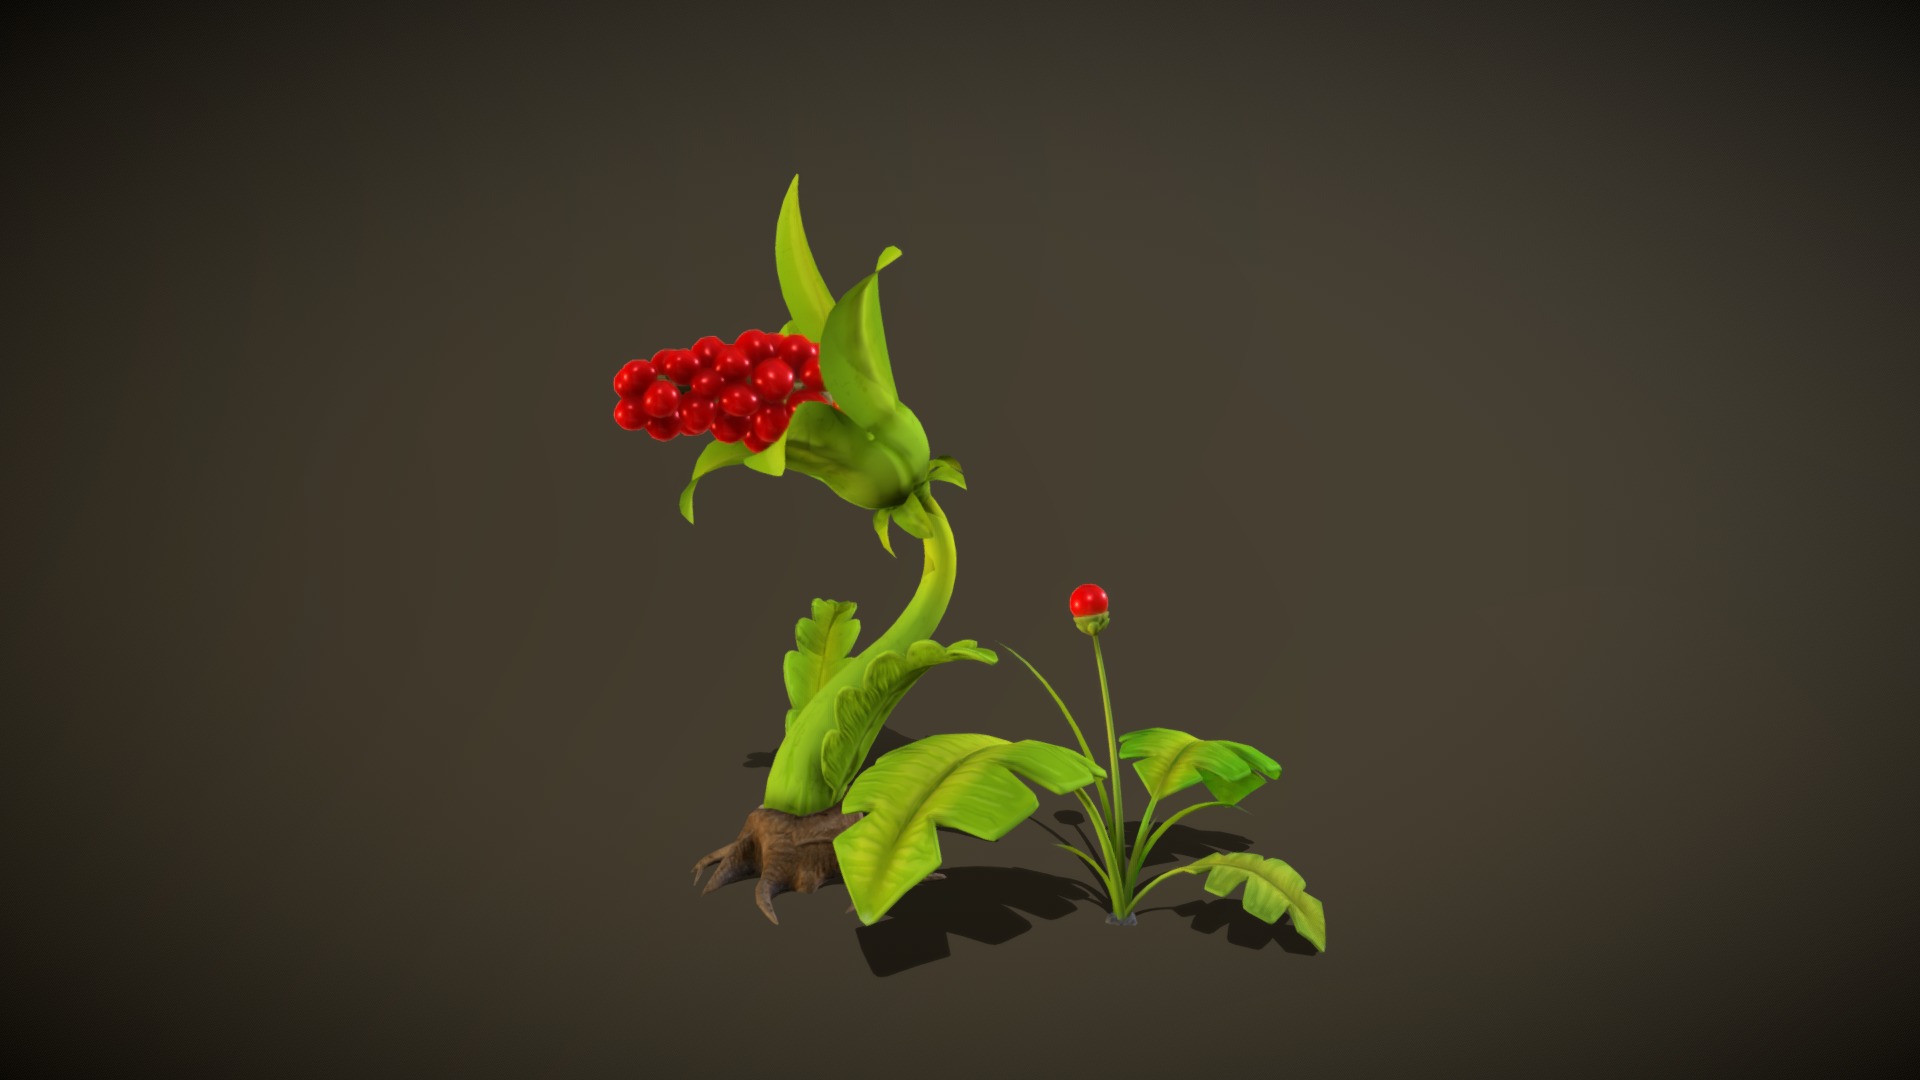 3D model Stylized plants 3d models - This is a 3D model of the Stylized plants 3d models. The 3D model is about a plant with red berries.